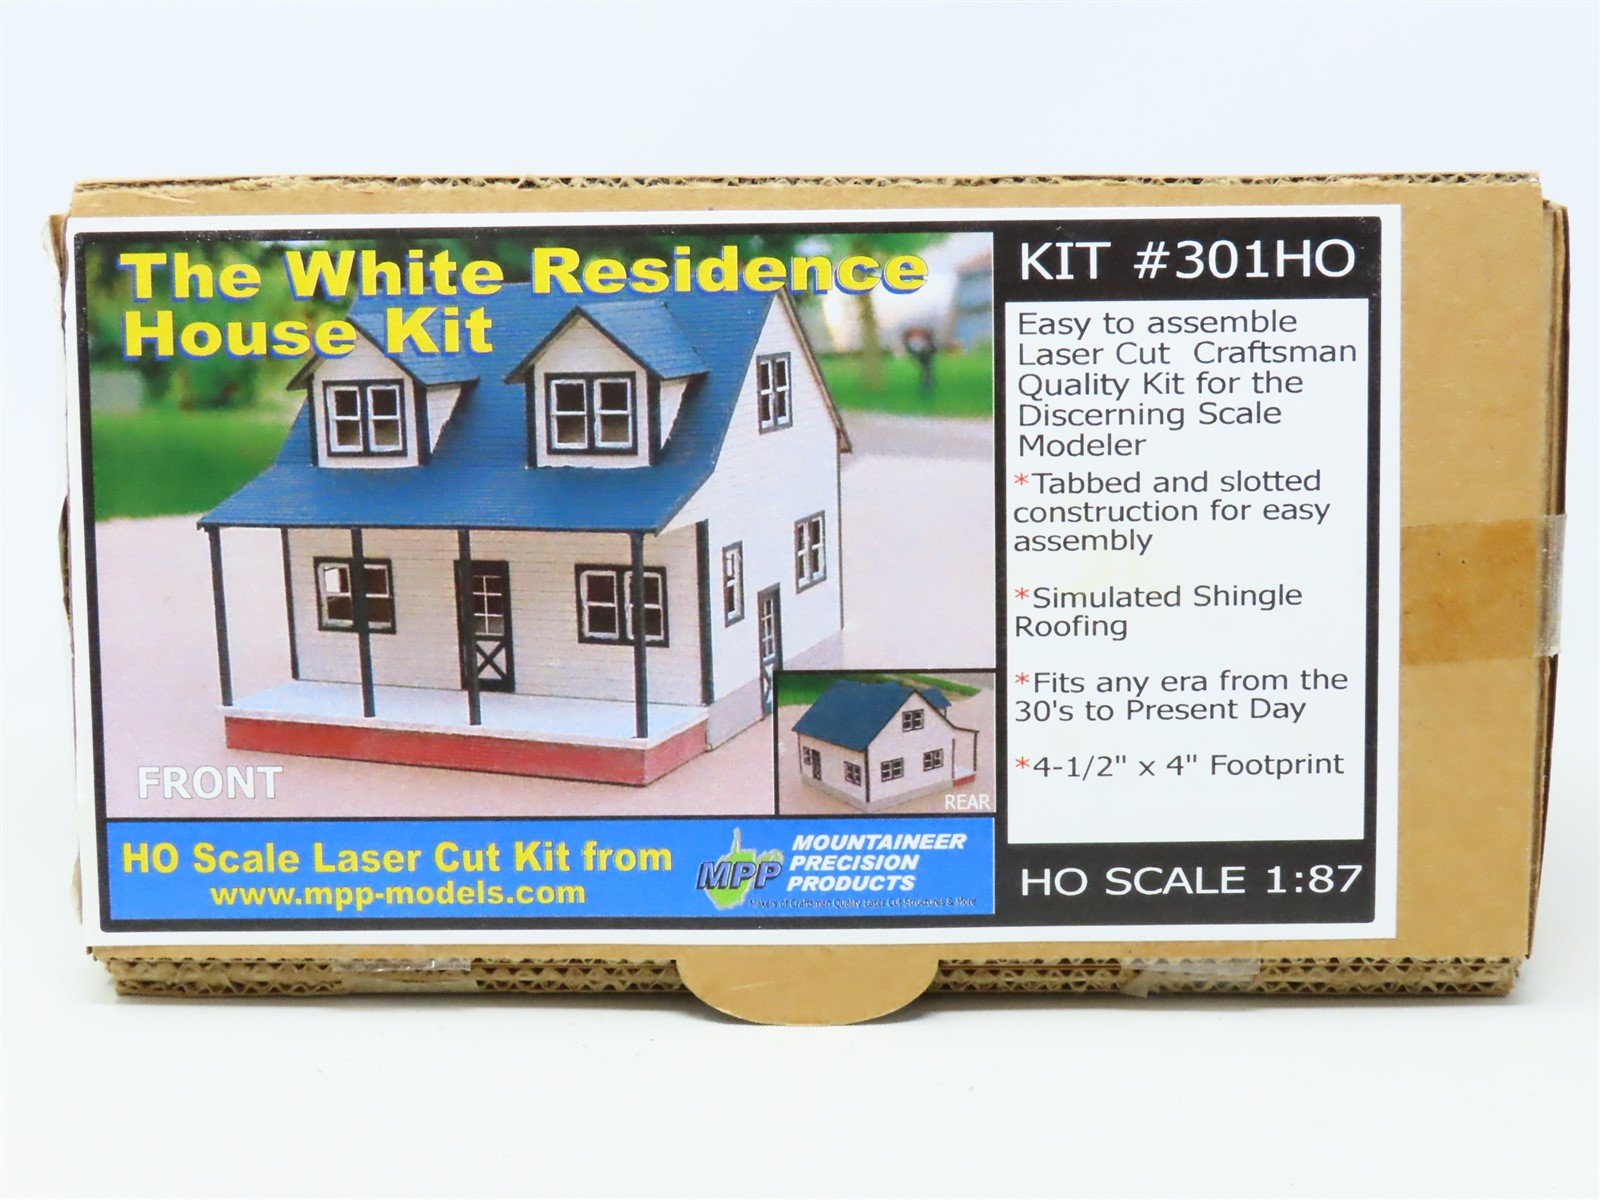 HO Scale MPP Mountaineer Precision Products Kit #301HO The White Residence House